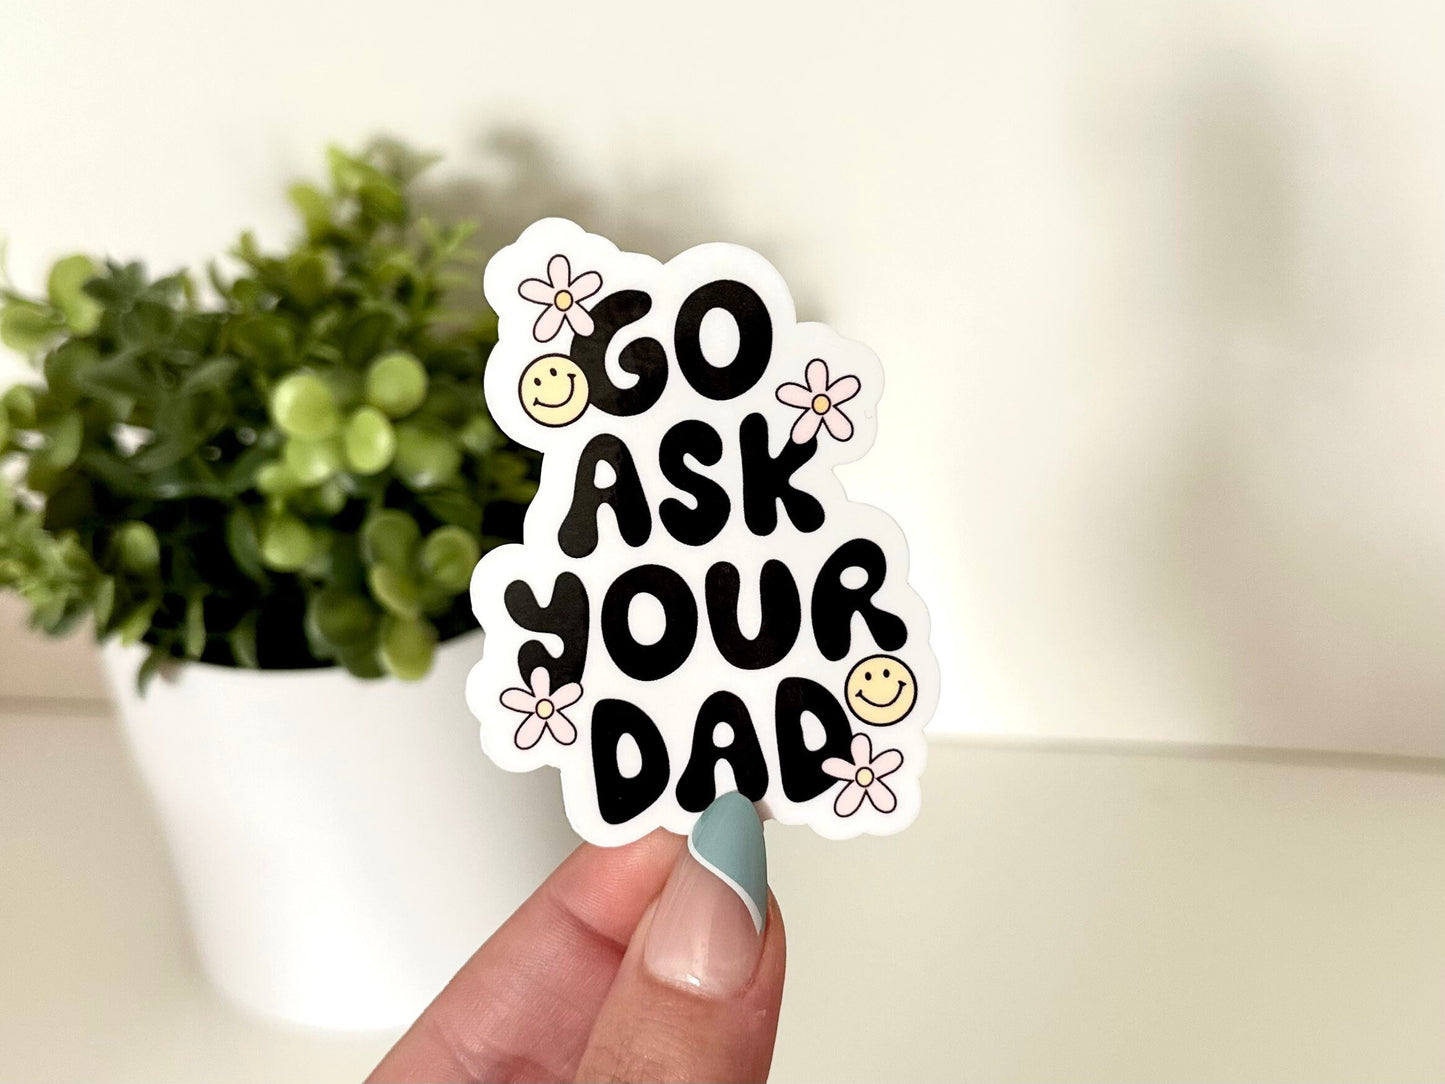 Go Ask Your Dad Waterproof Sticker, Gifts for Mom, Mom Stickers, Mother’s Day Gifts, Waterbottle Stickers, Tumbler Decal, Mug Sticker